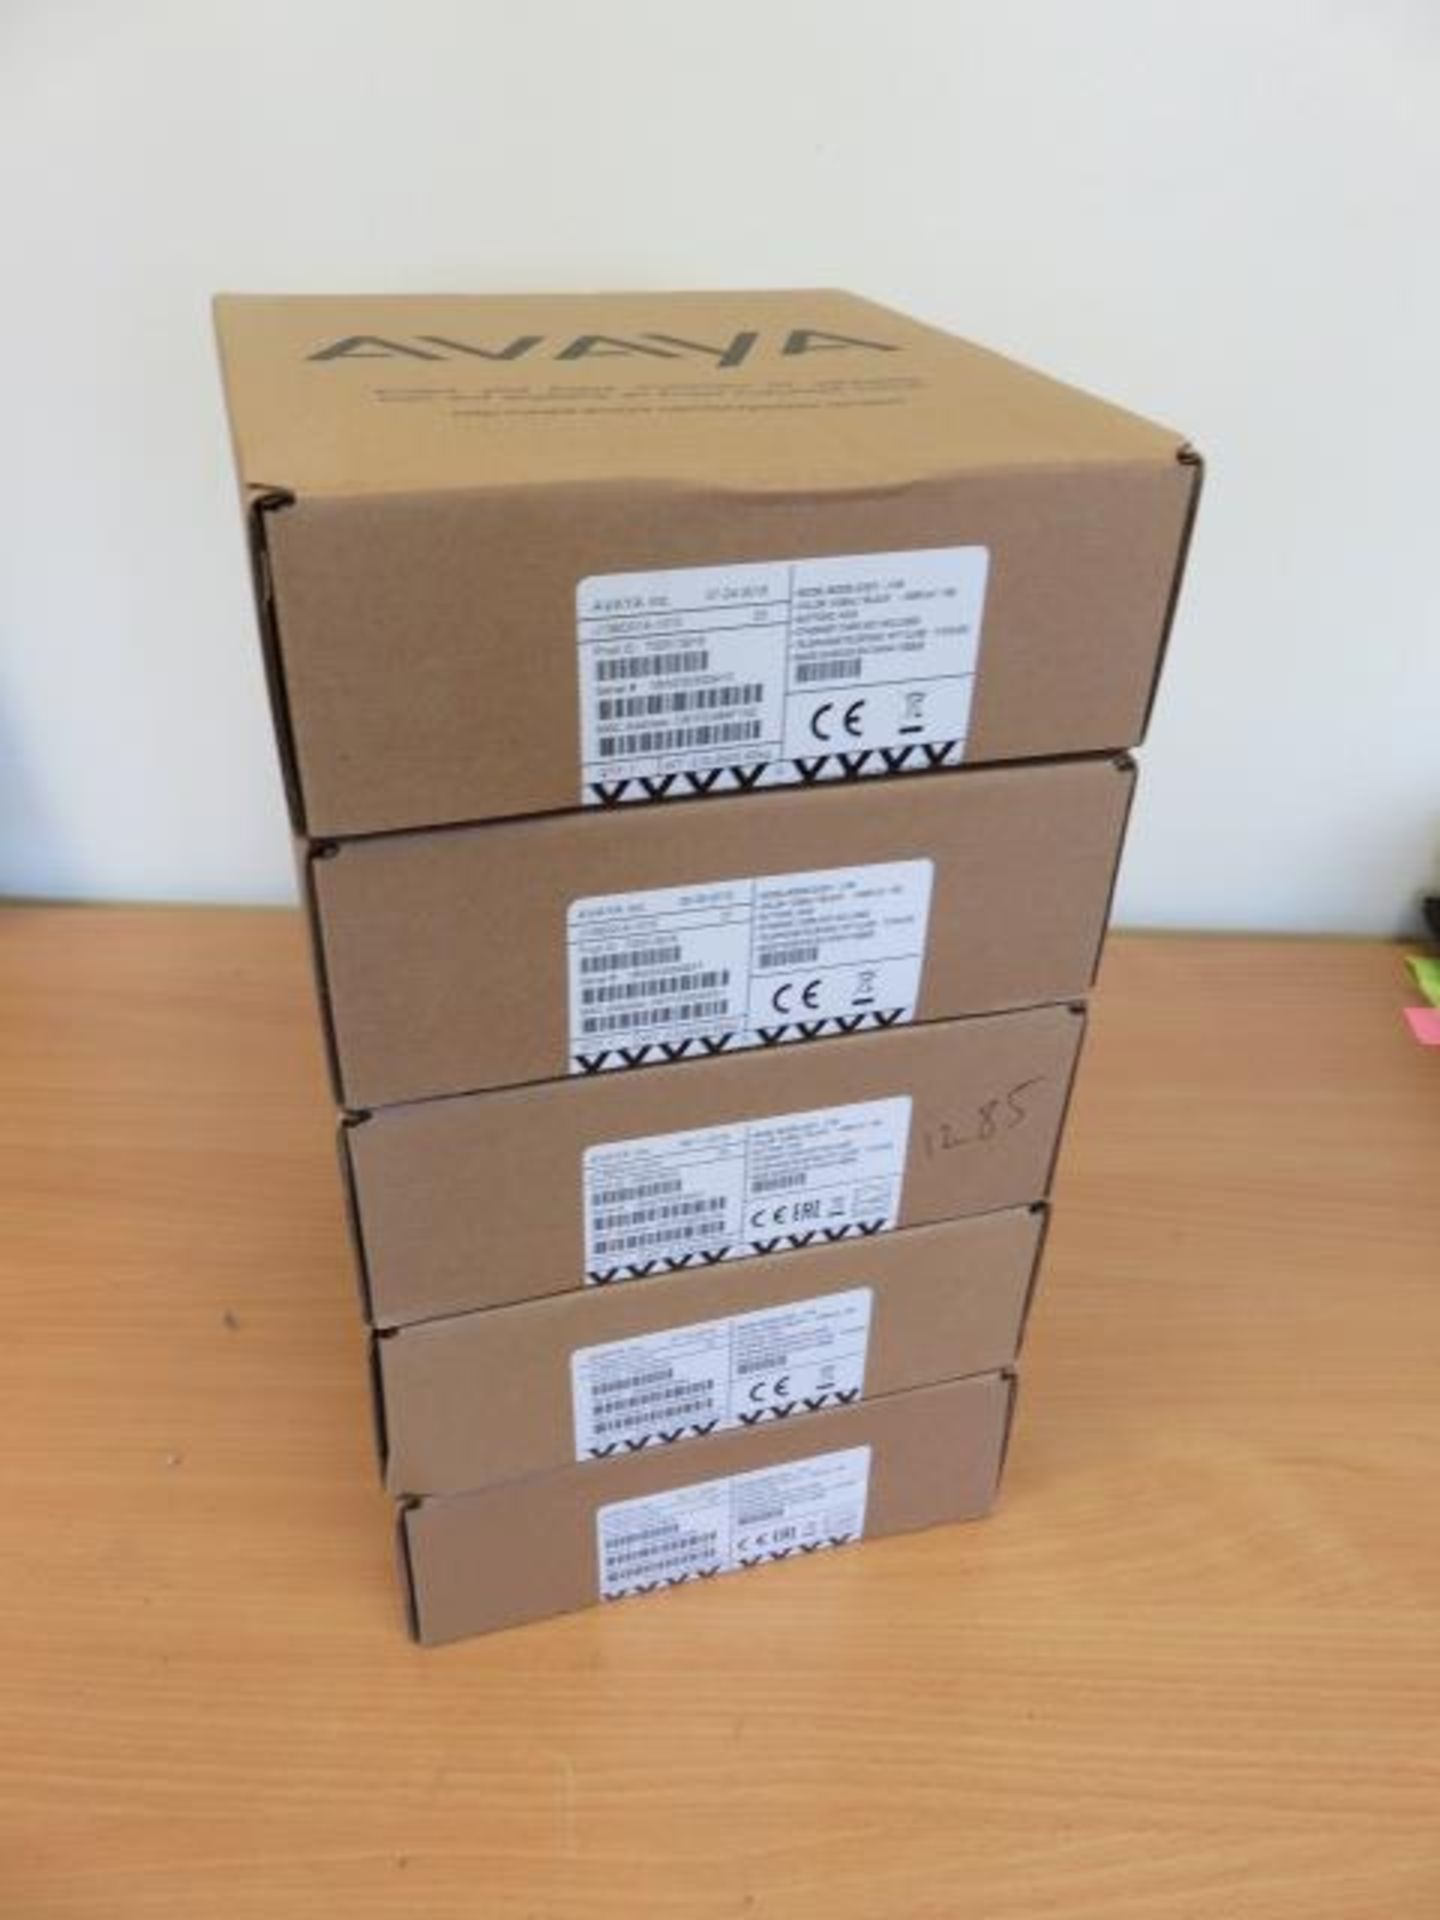 5 x Avaya J139D01A-1015 Black IP Telephone Handsets (New In Box) (Please note that this is a represe